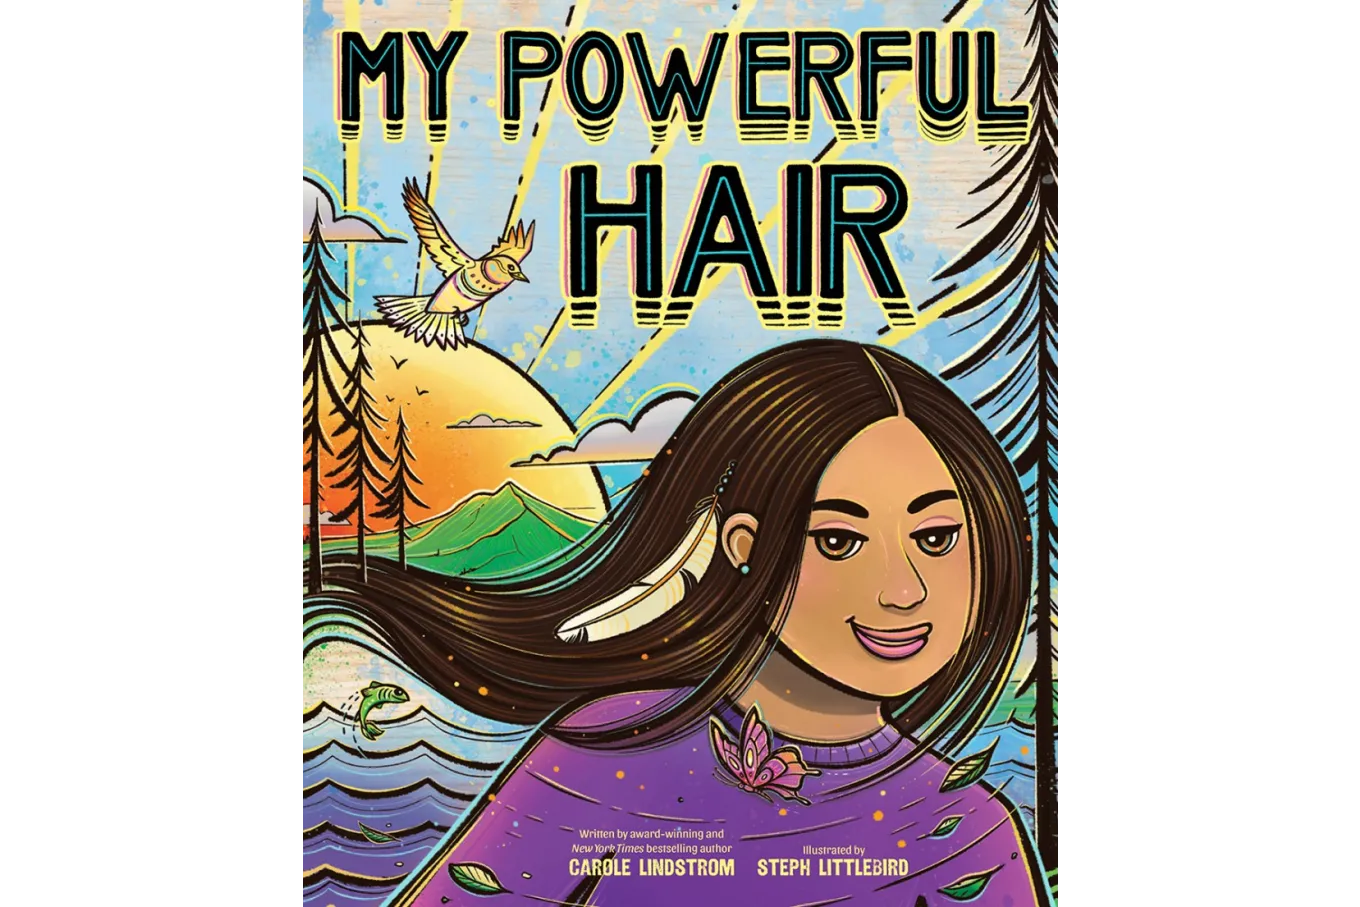 Cover of my powerful hair